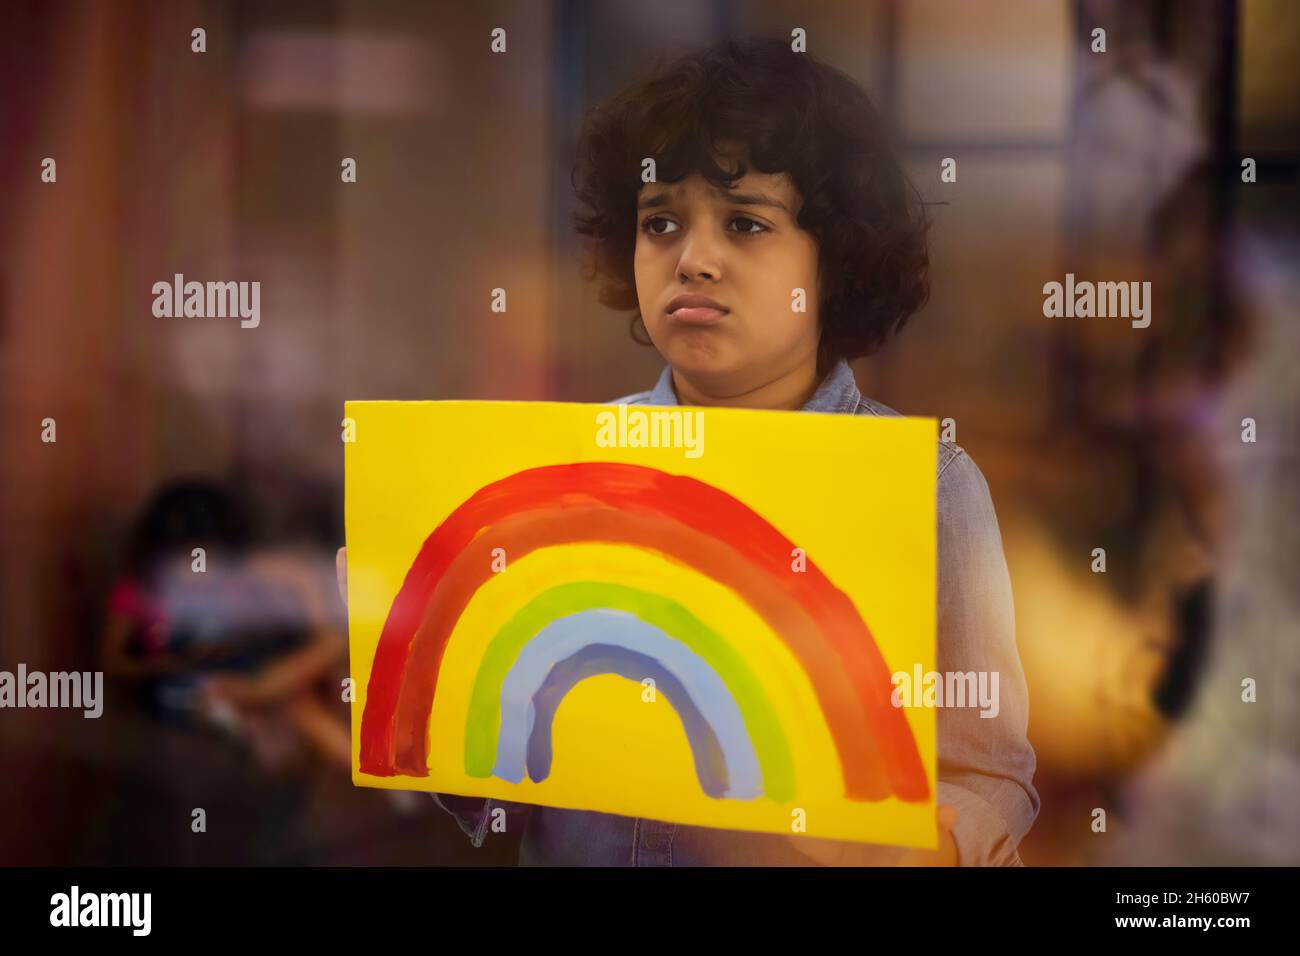 An Indian boy in sad mood showing a rainbow painting in front of camera Stock Photo